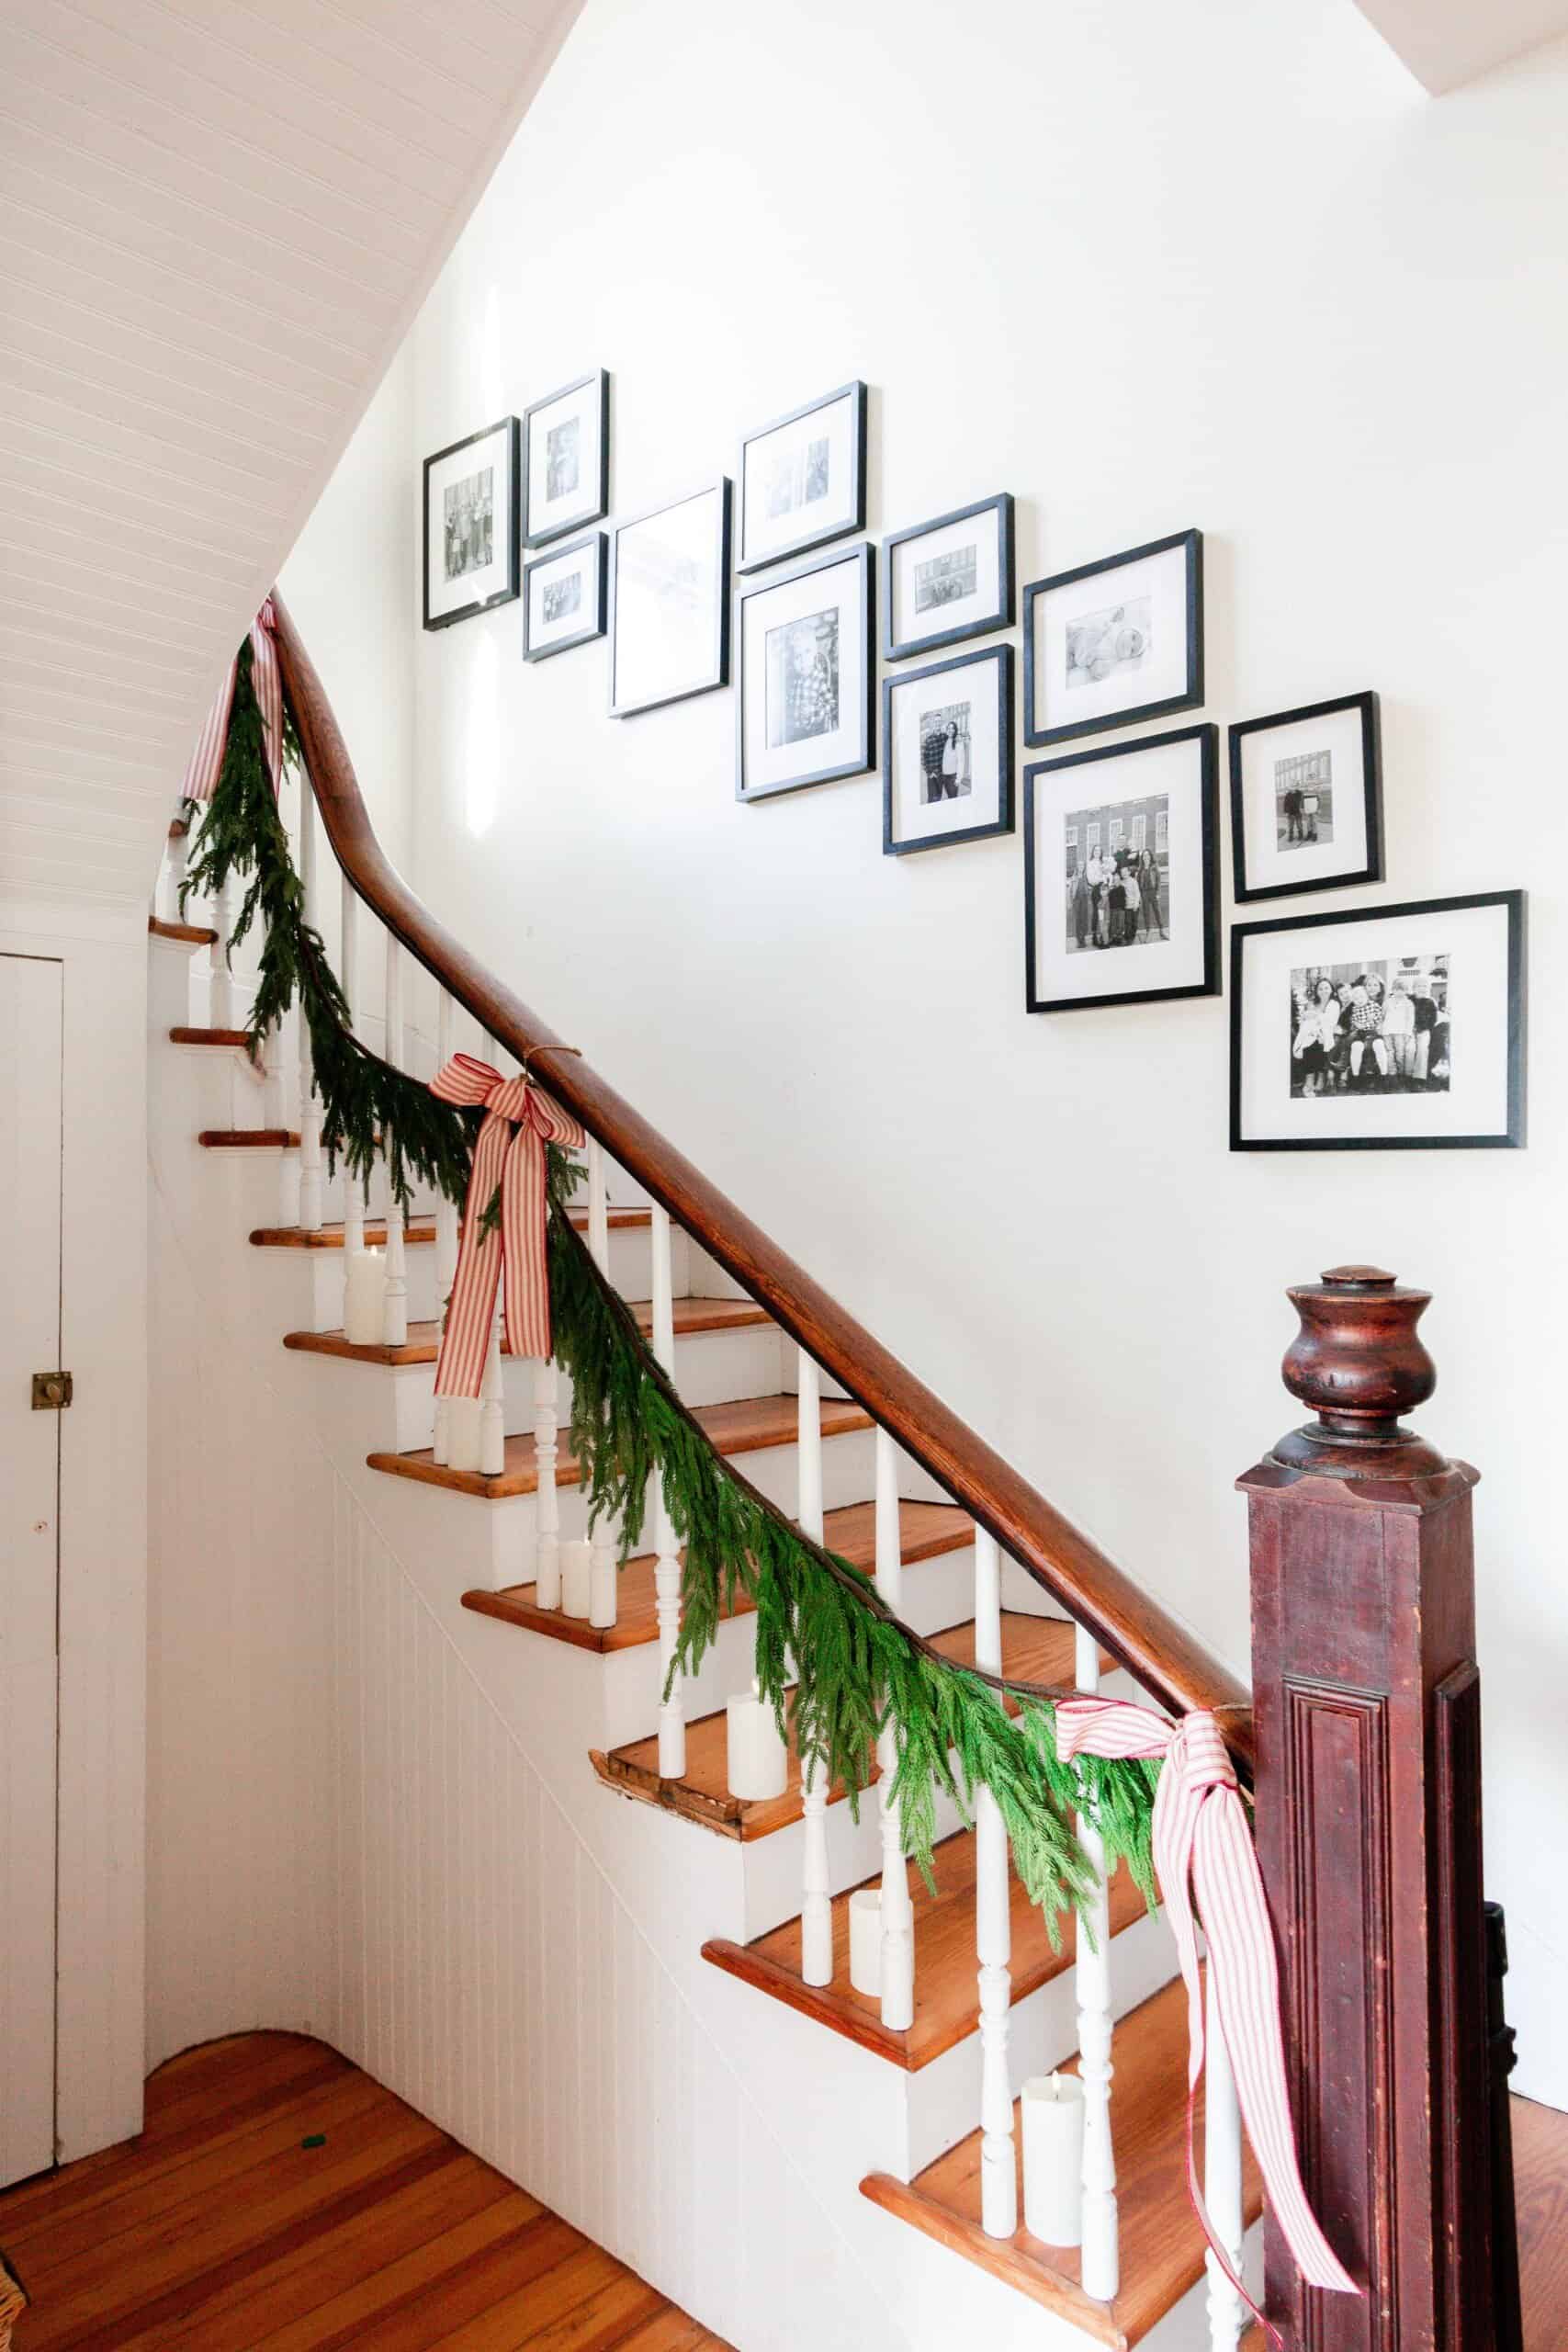 How To Make A Staircase Gallery Wall - Farmhouse on Boone